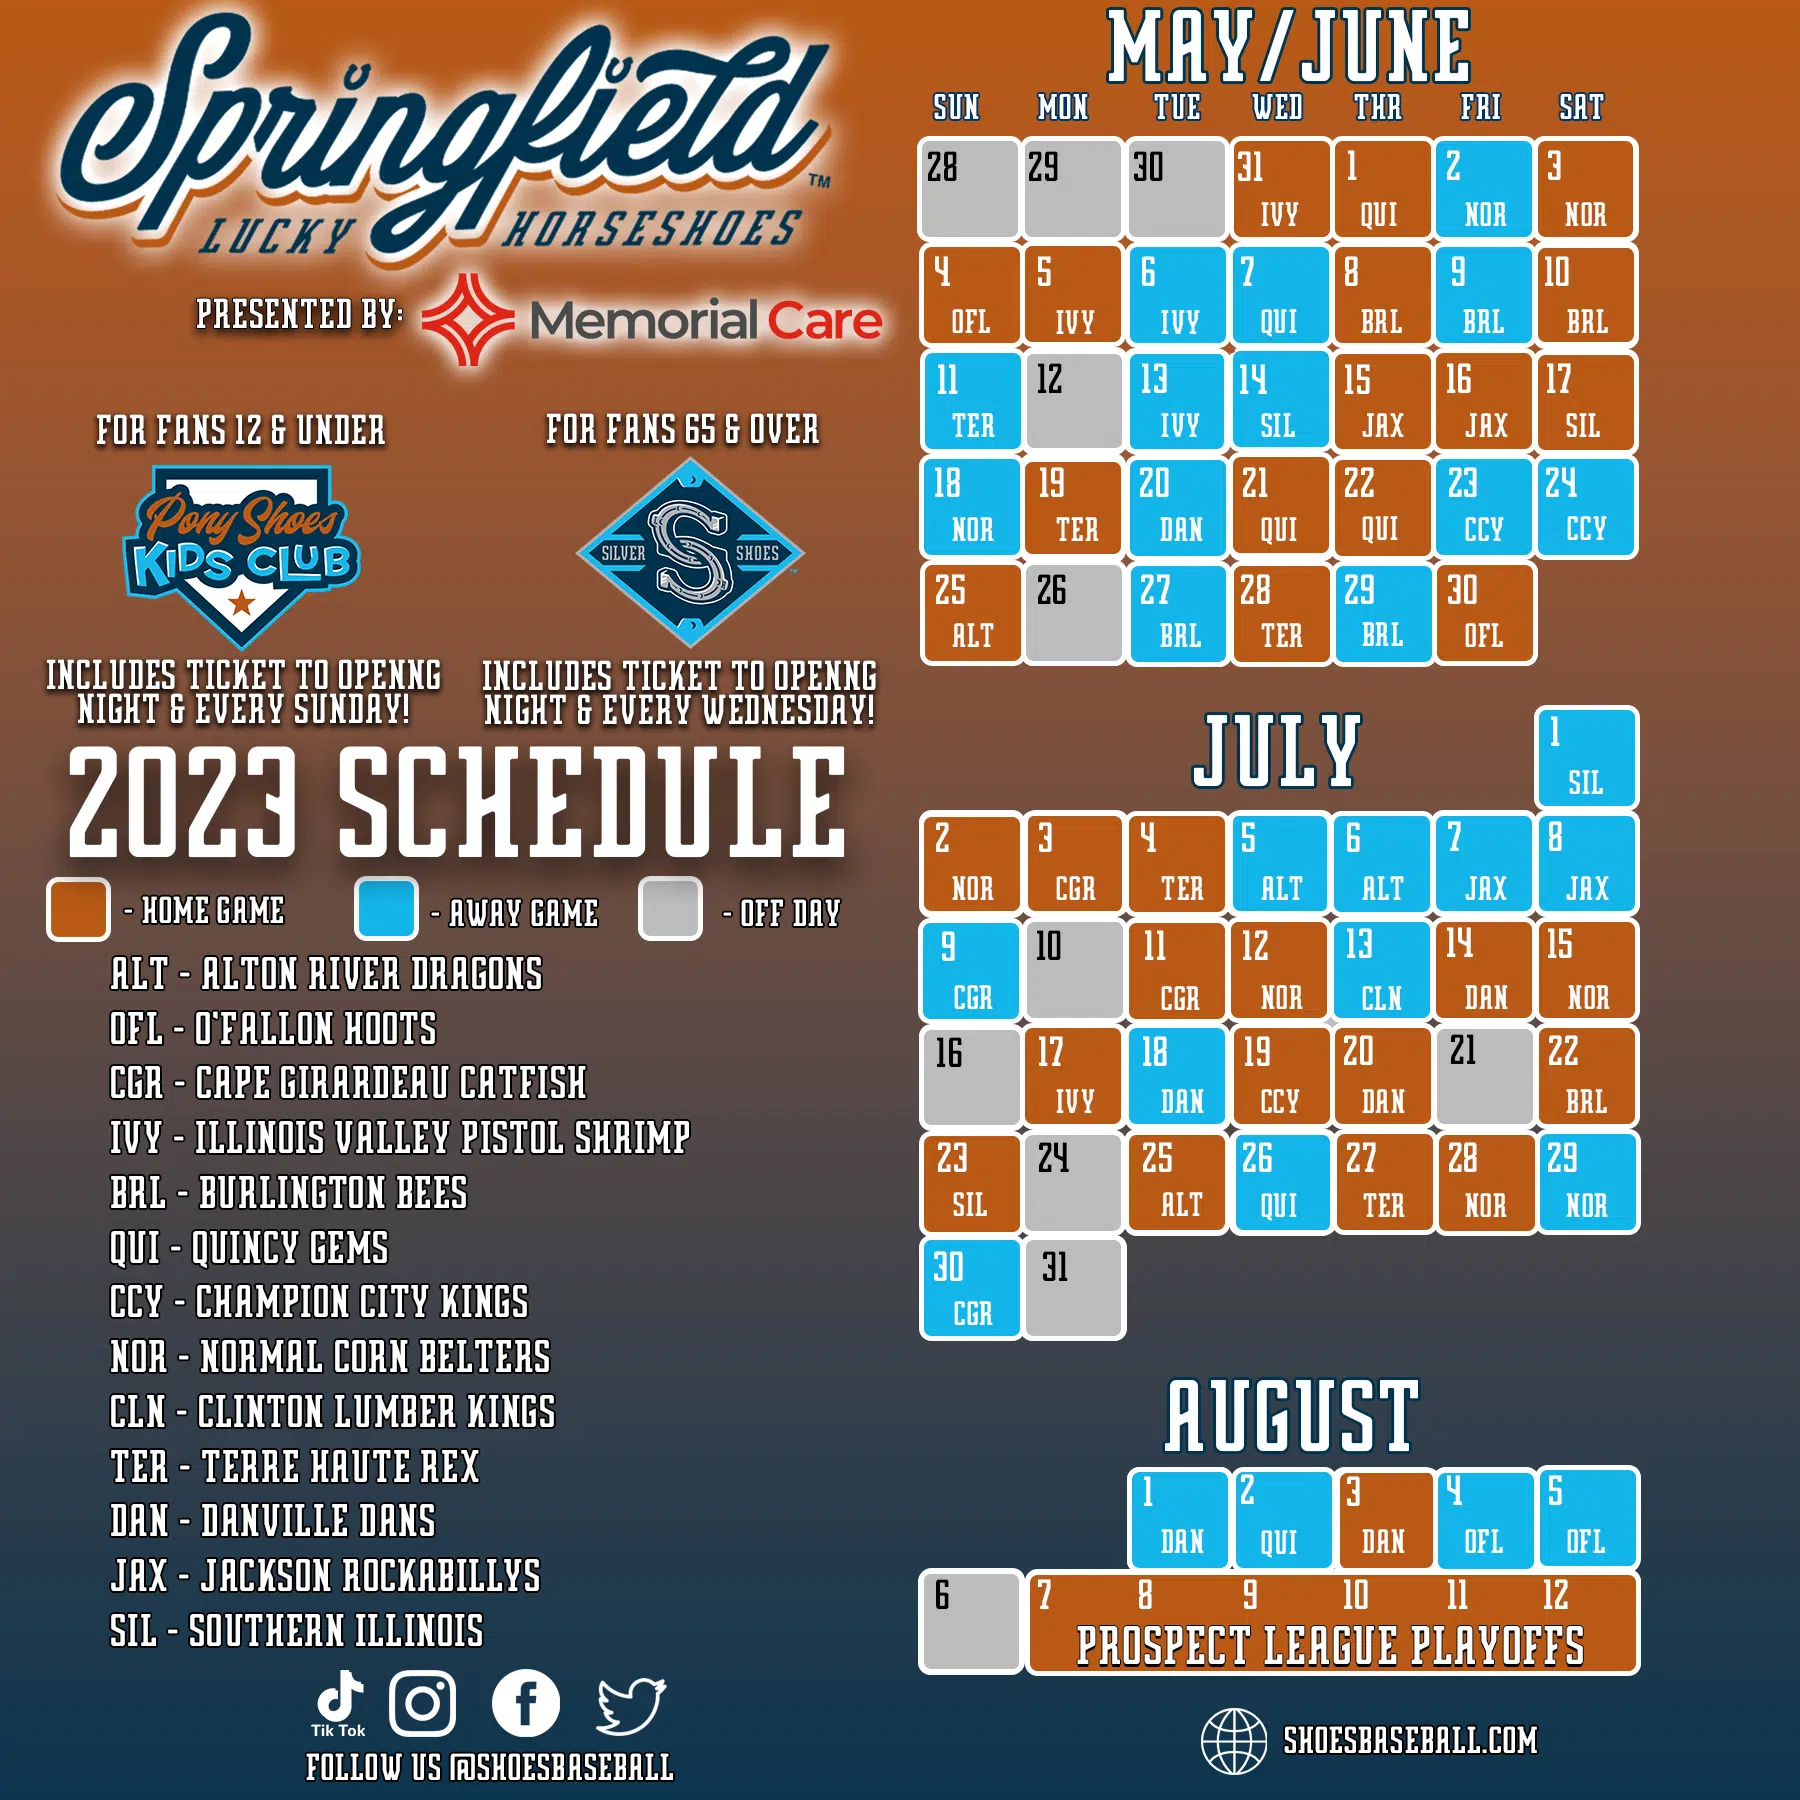 SPRINGFIELD LUCKY HORSESHOES ANNOUNCE 2023 SCHEDULE Neuhoff Media